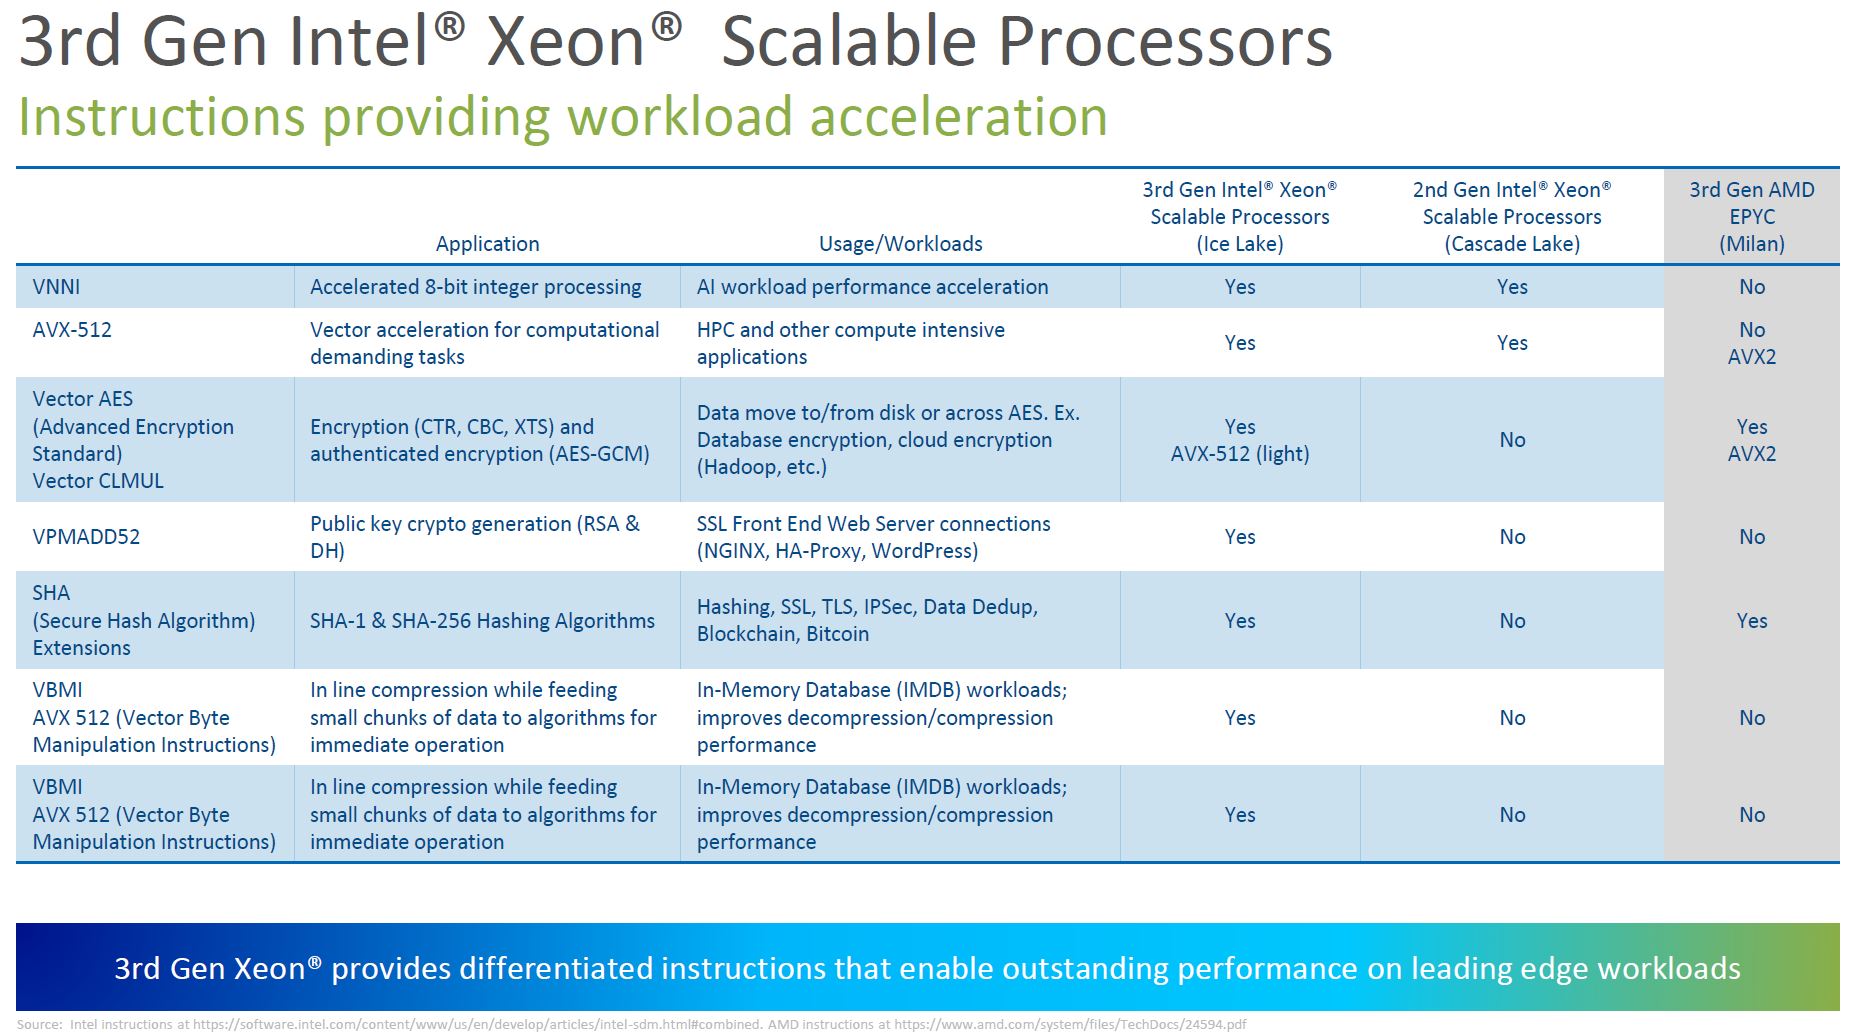 3rd Generation Intel Xeon Scalable Focus On Acceleration